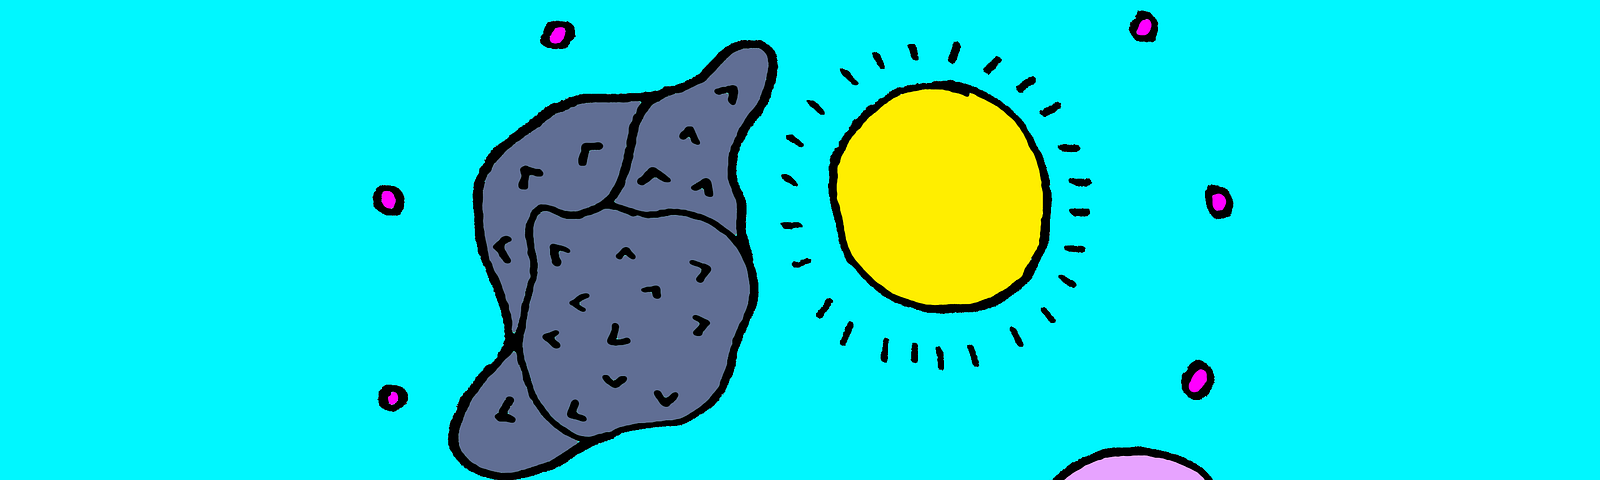 A face, a hand, a spiky blob, a sun, and a hole float in the air within a ring of dots